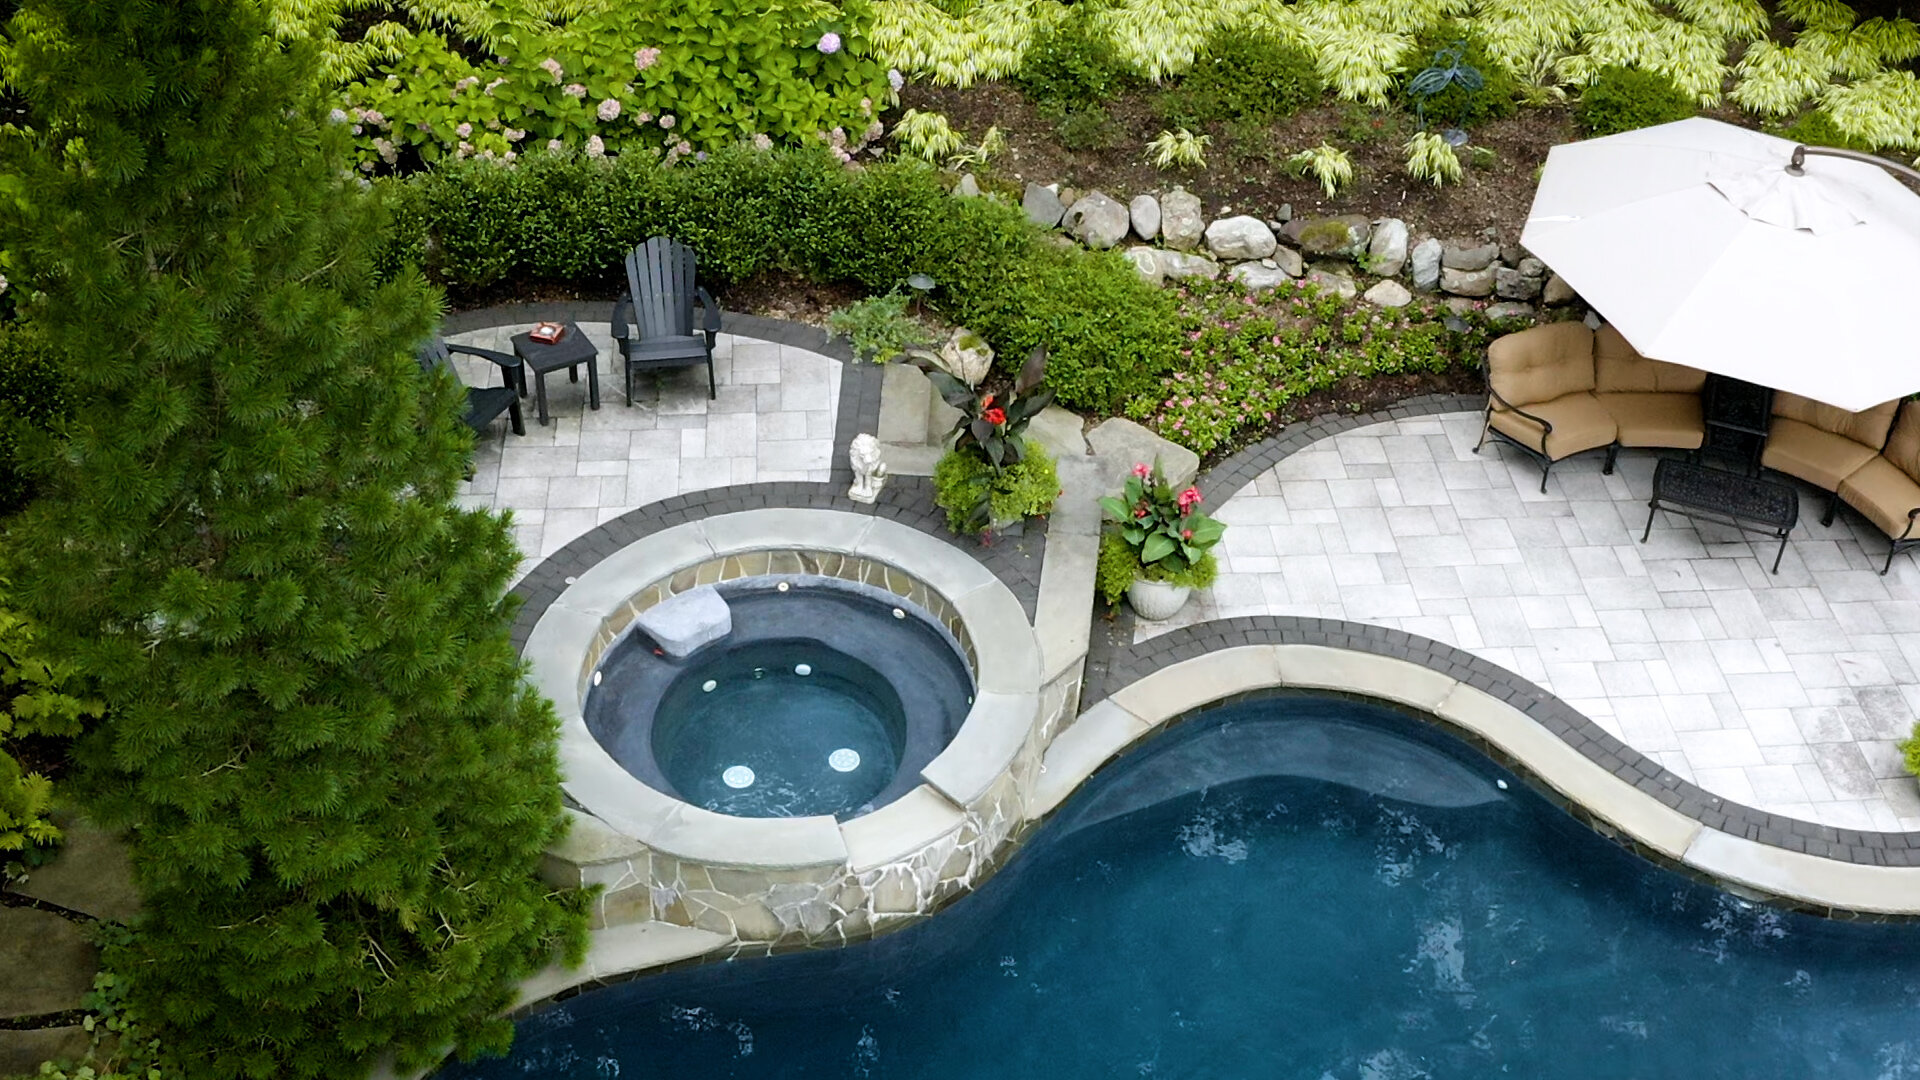 Landscape design with pool and spa in Mahwah, NJ